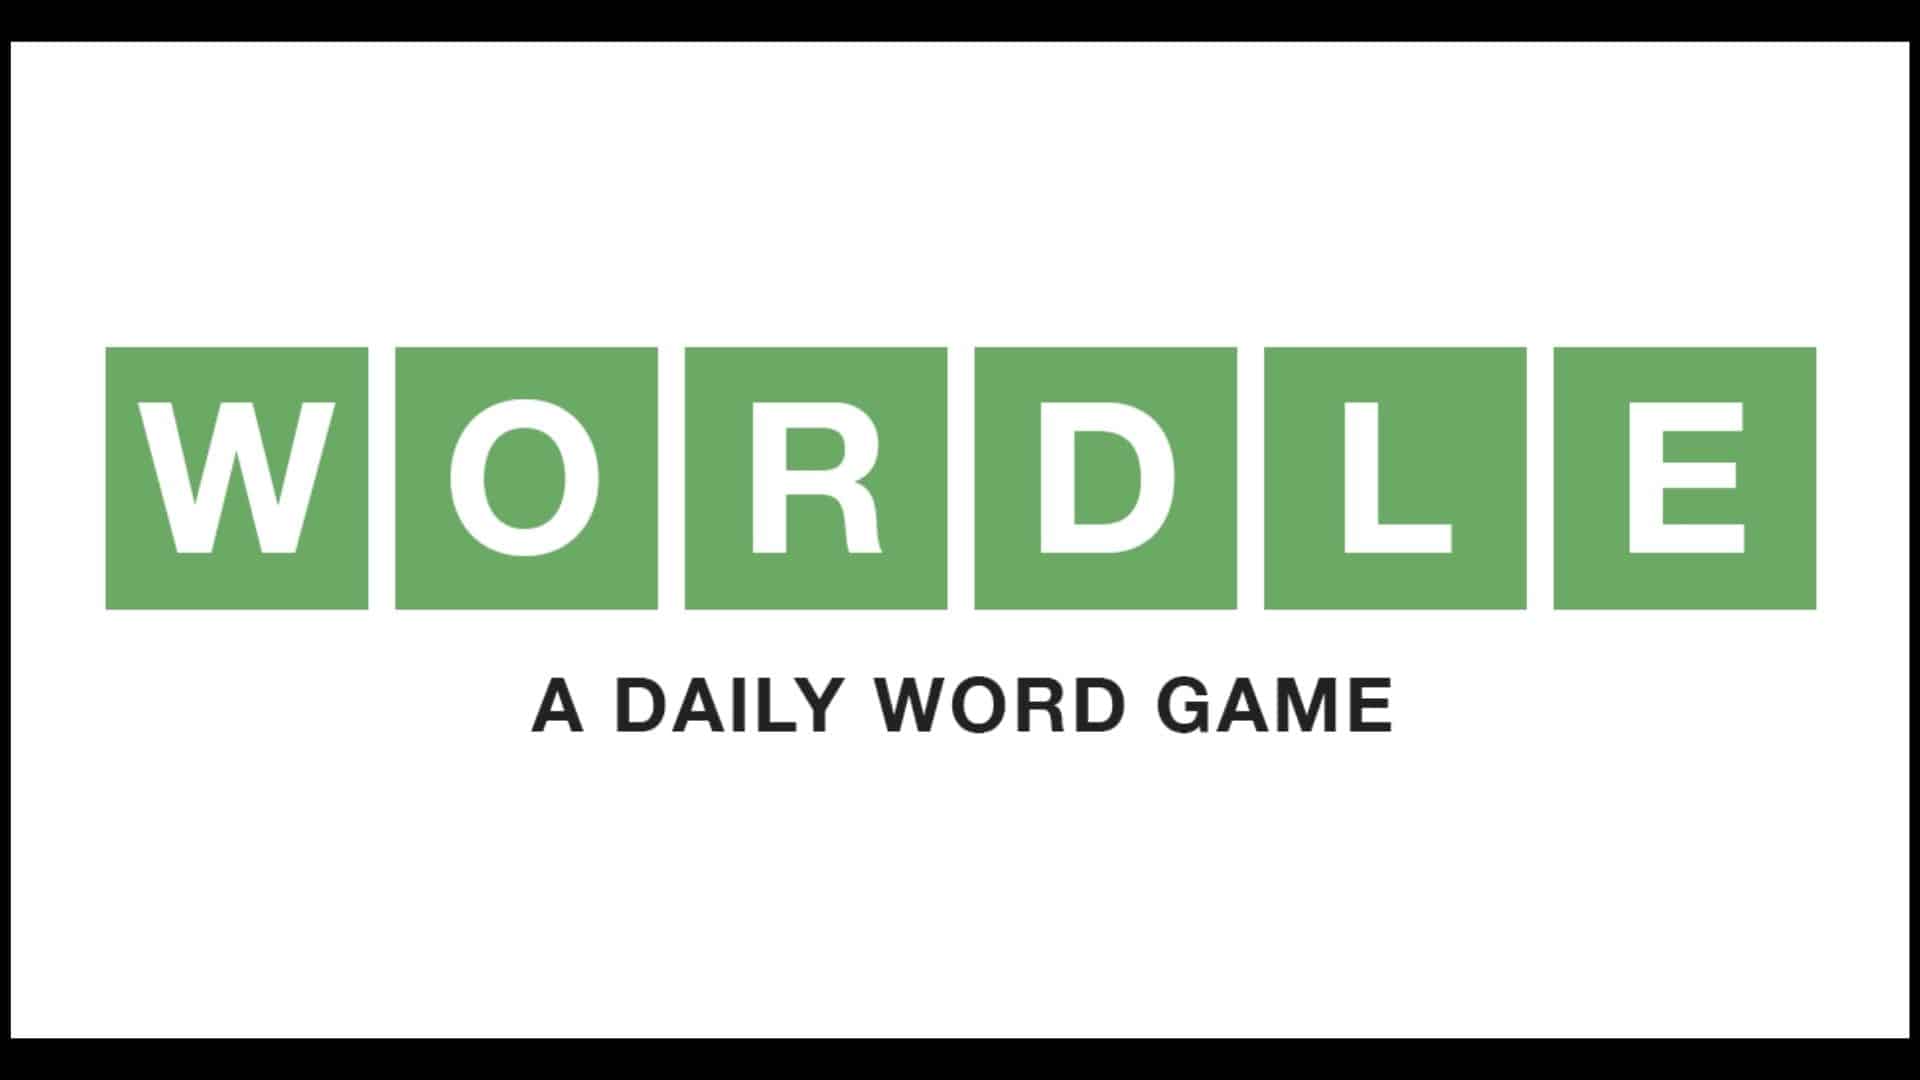 From Wordle to Scrabble: Do word games bring out the worst in